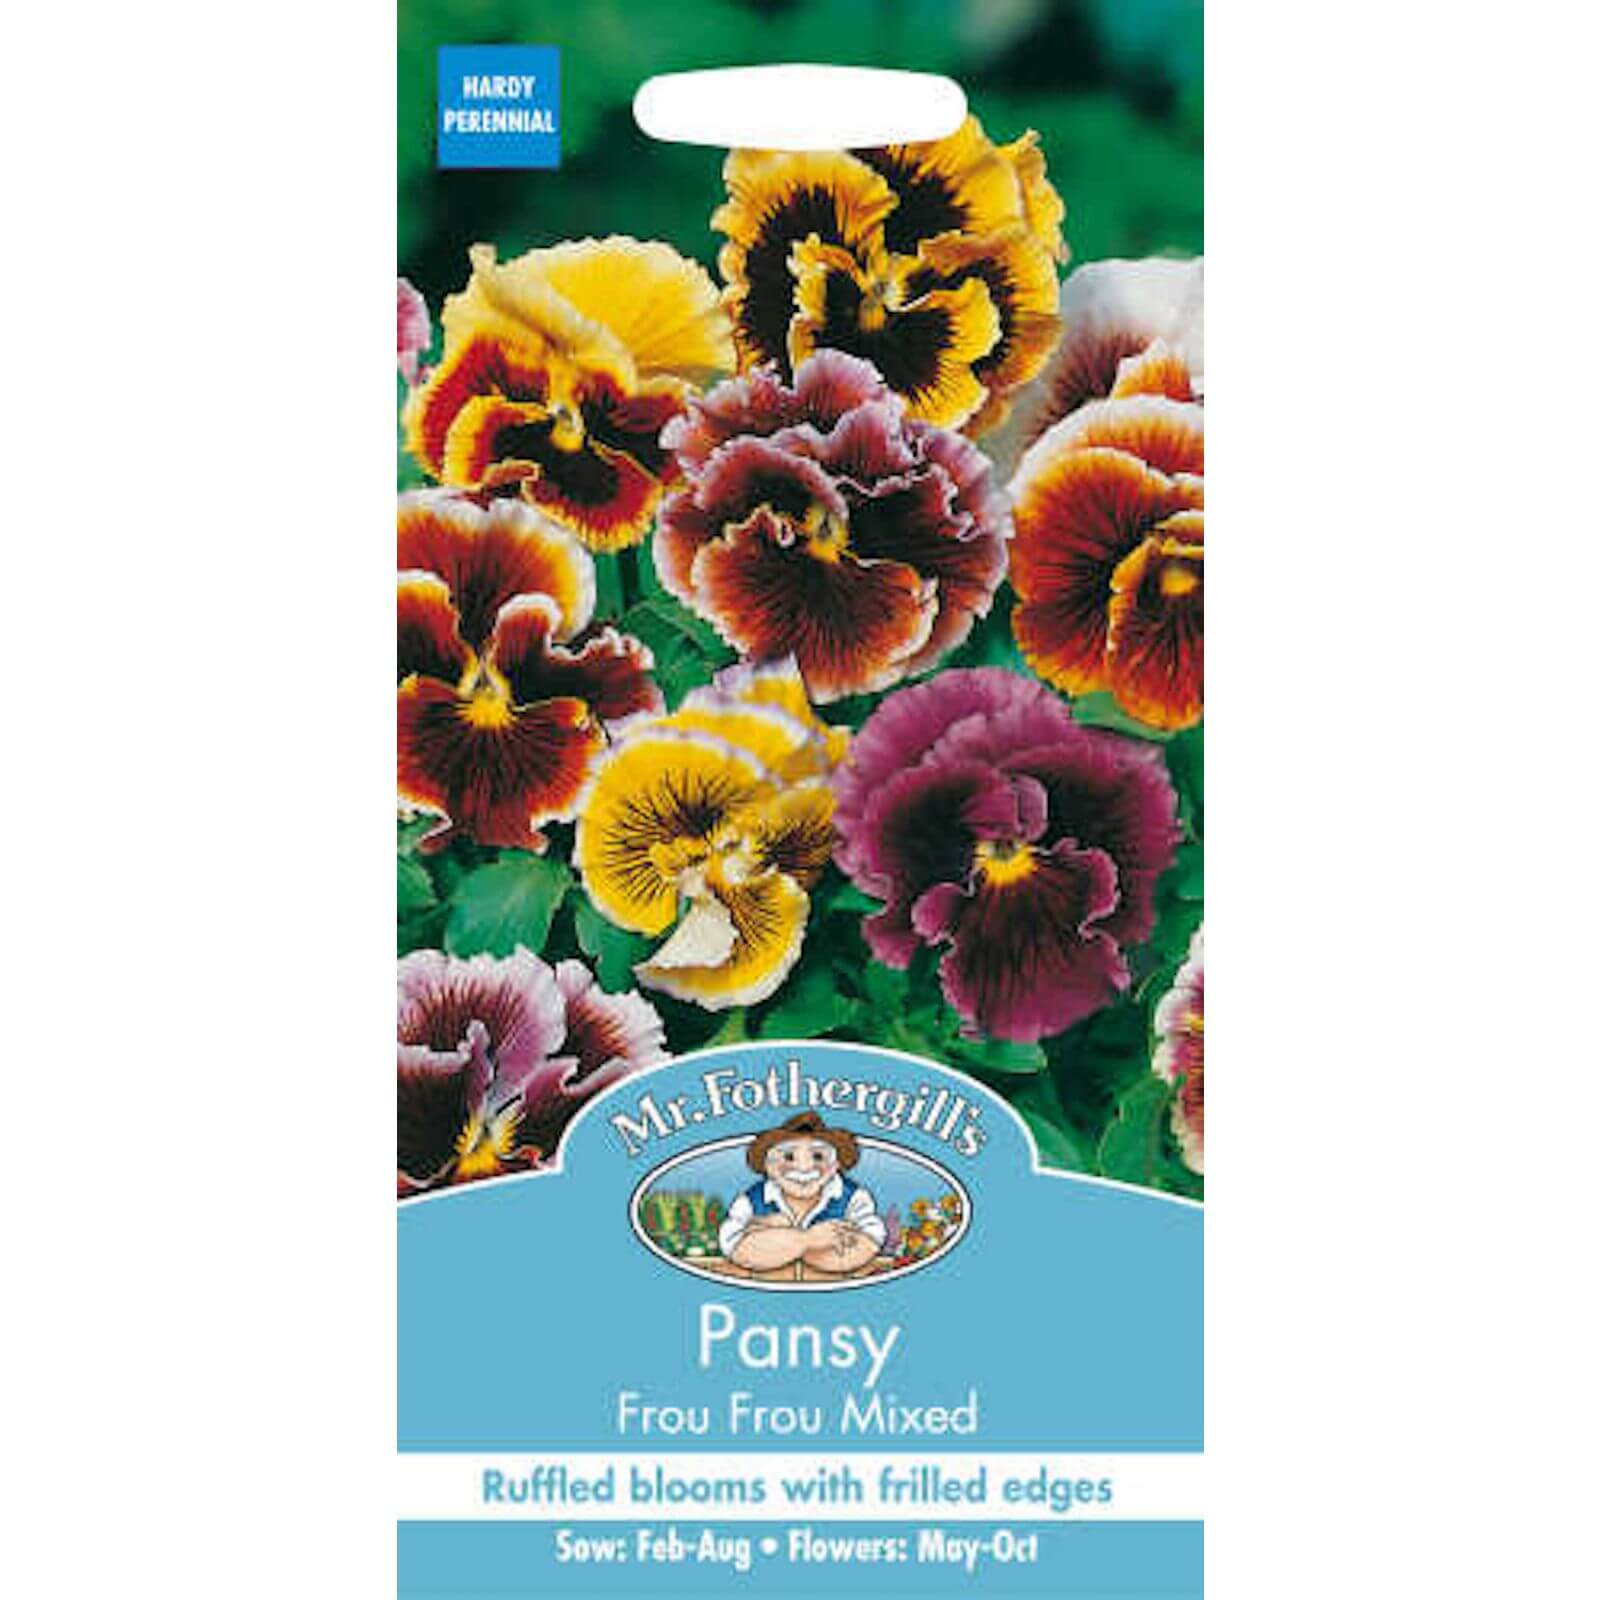 Mr. Fothergill's Pansy Frou Frou Mixed Seeds